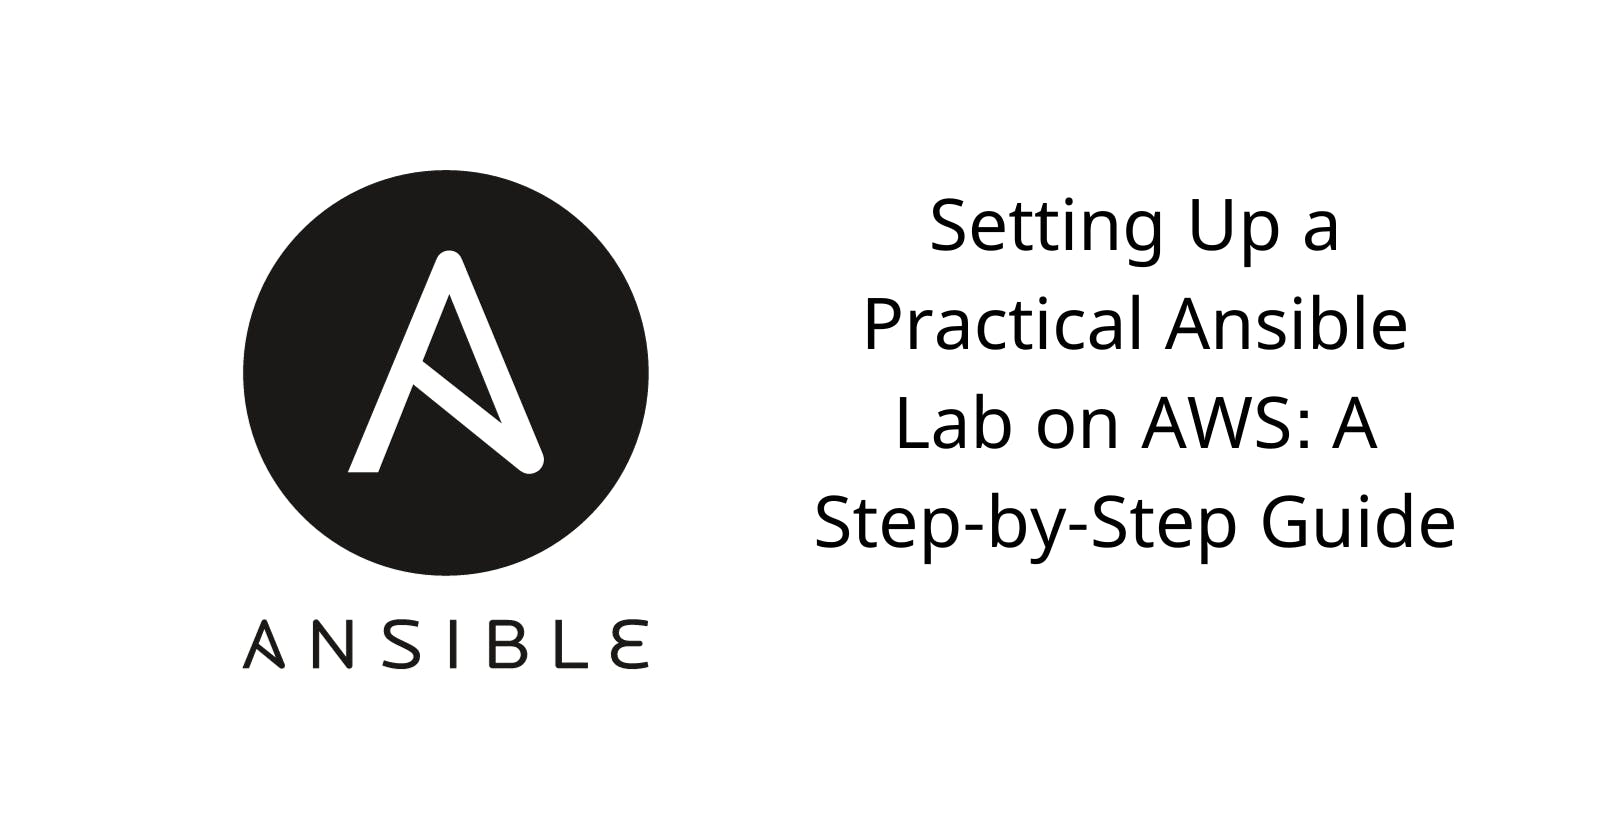 Setting Up a Practical Ansible Lab on AWS: A Step-by-Step Guide